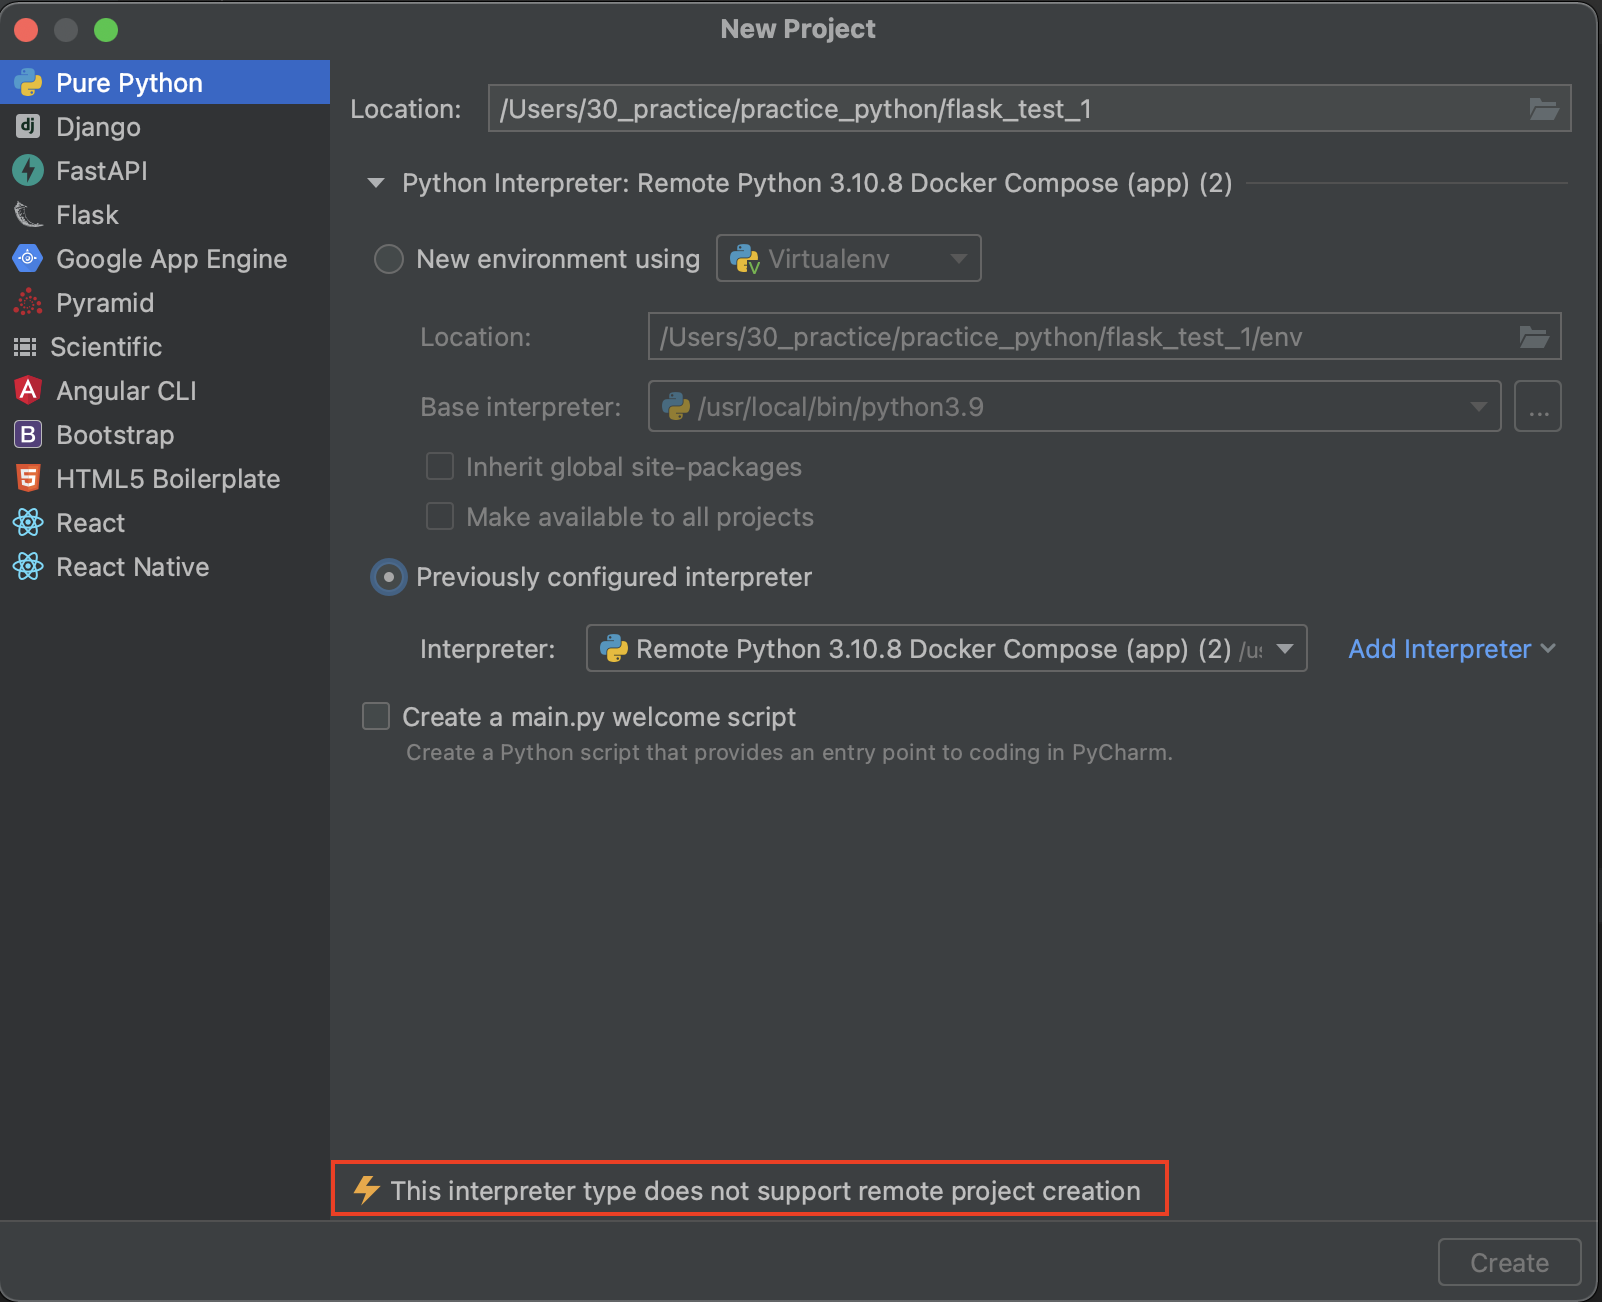 PyCharm This interpreter type does not support remote project creation